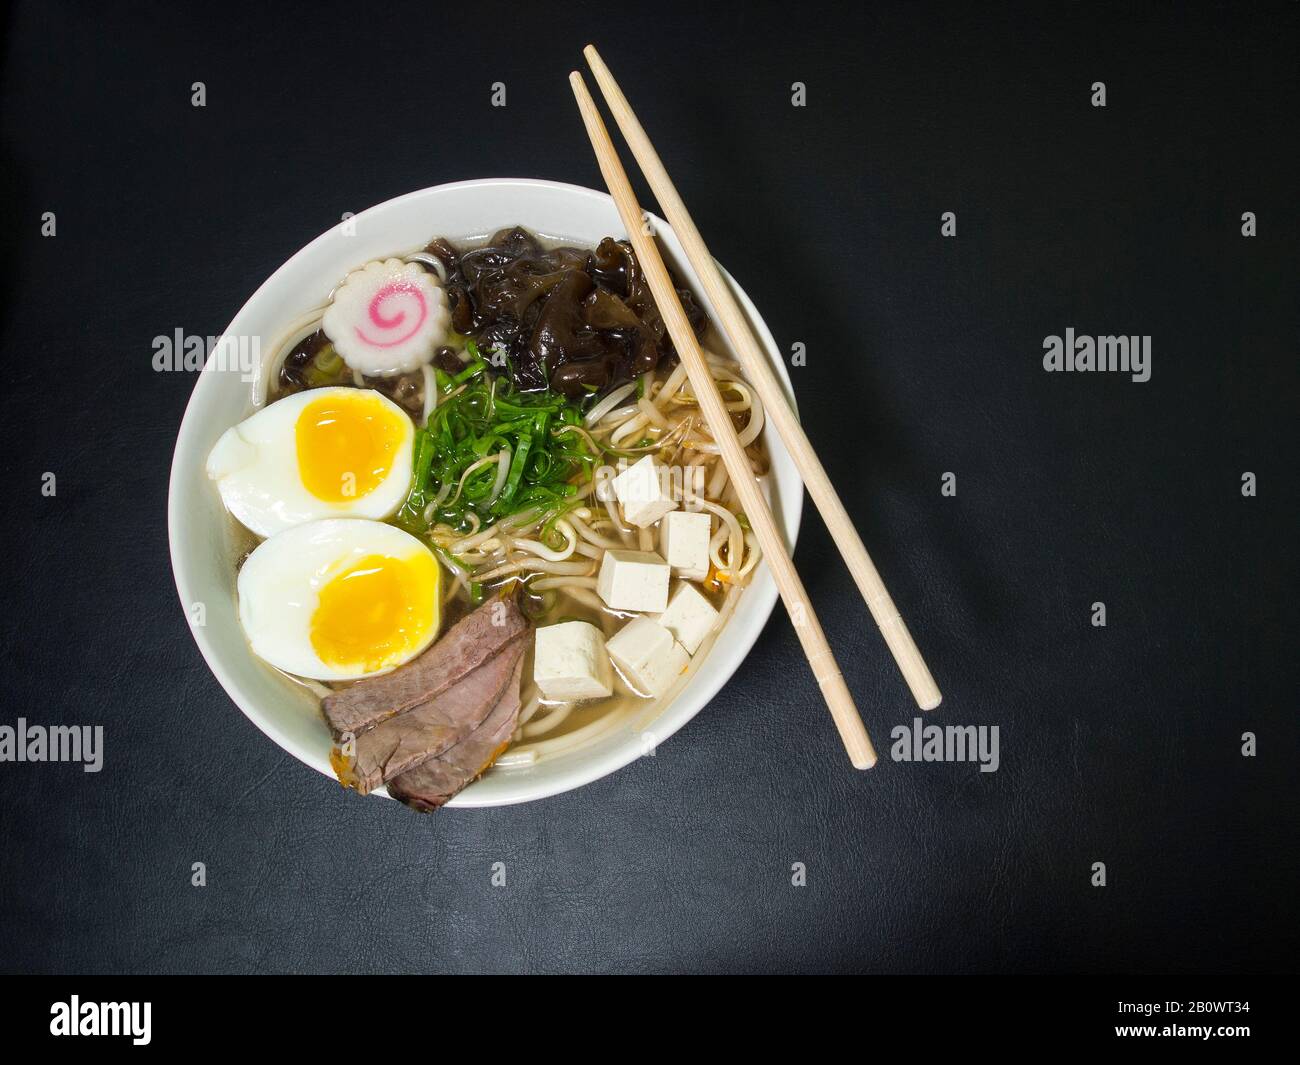 Ramen: Asian noodle soup with beef, eggs, fungi, vegetables, tofu, seaweed and naruto in a bowl with chopsticks. Black background. Top view. Stock Photo